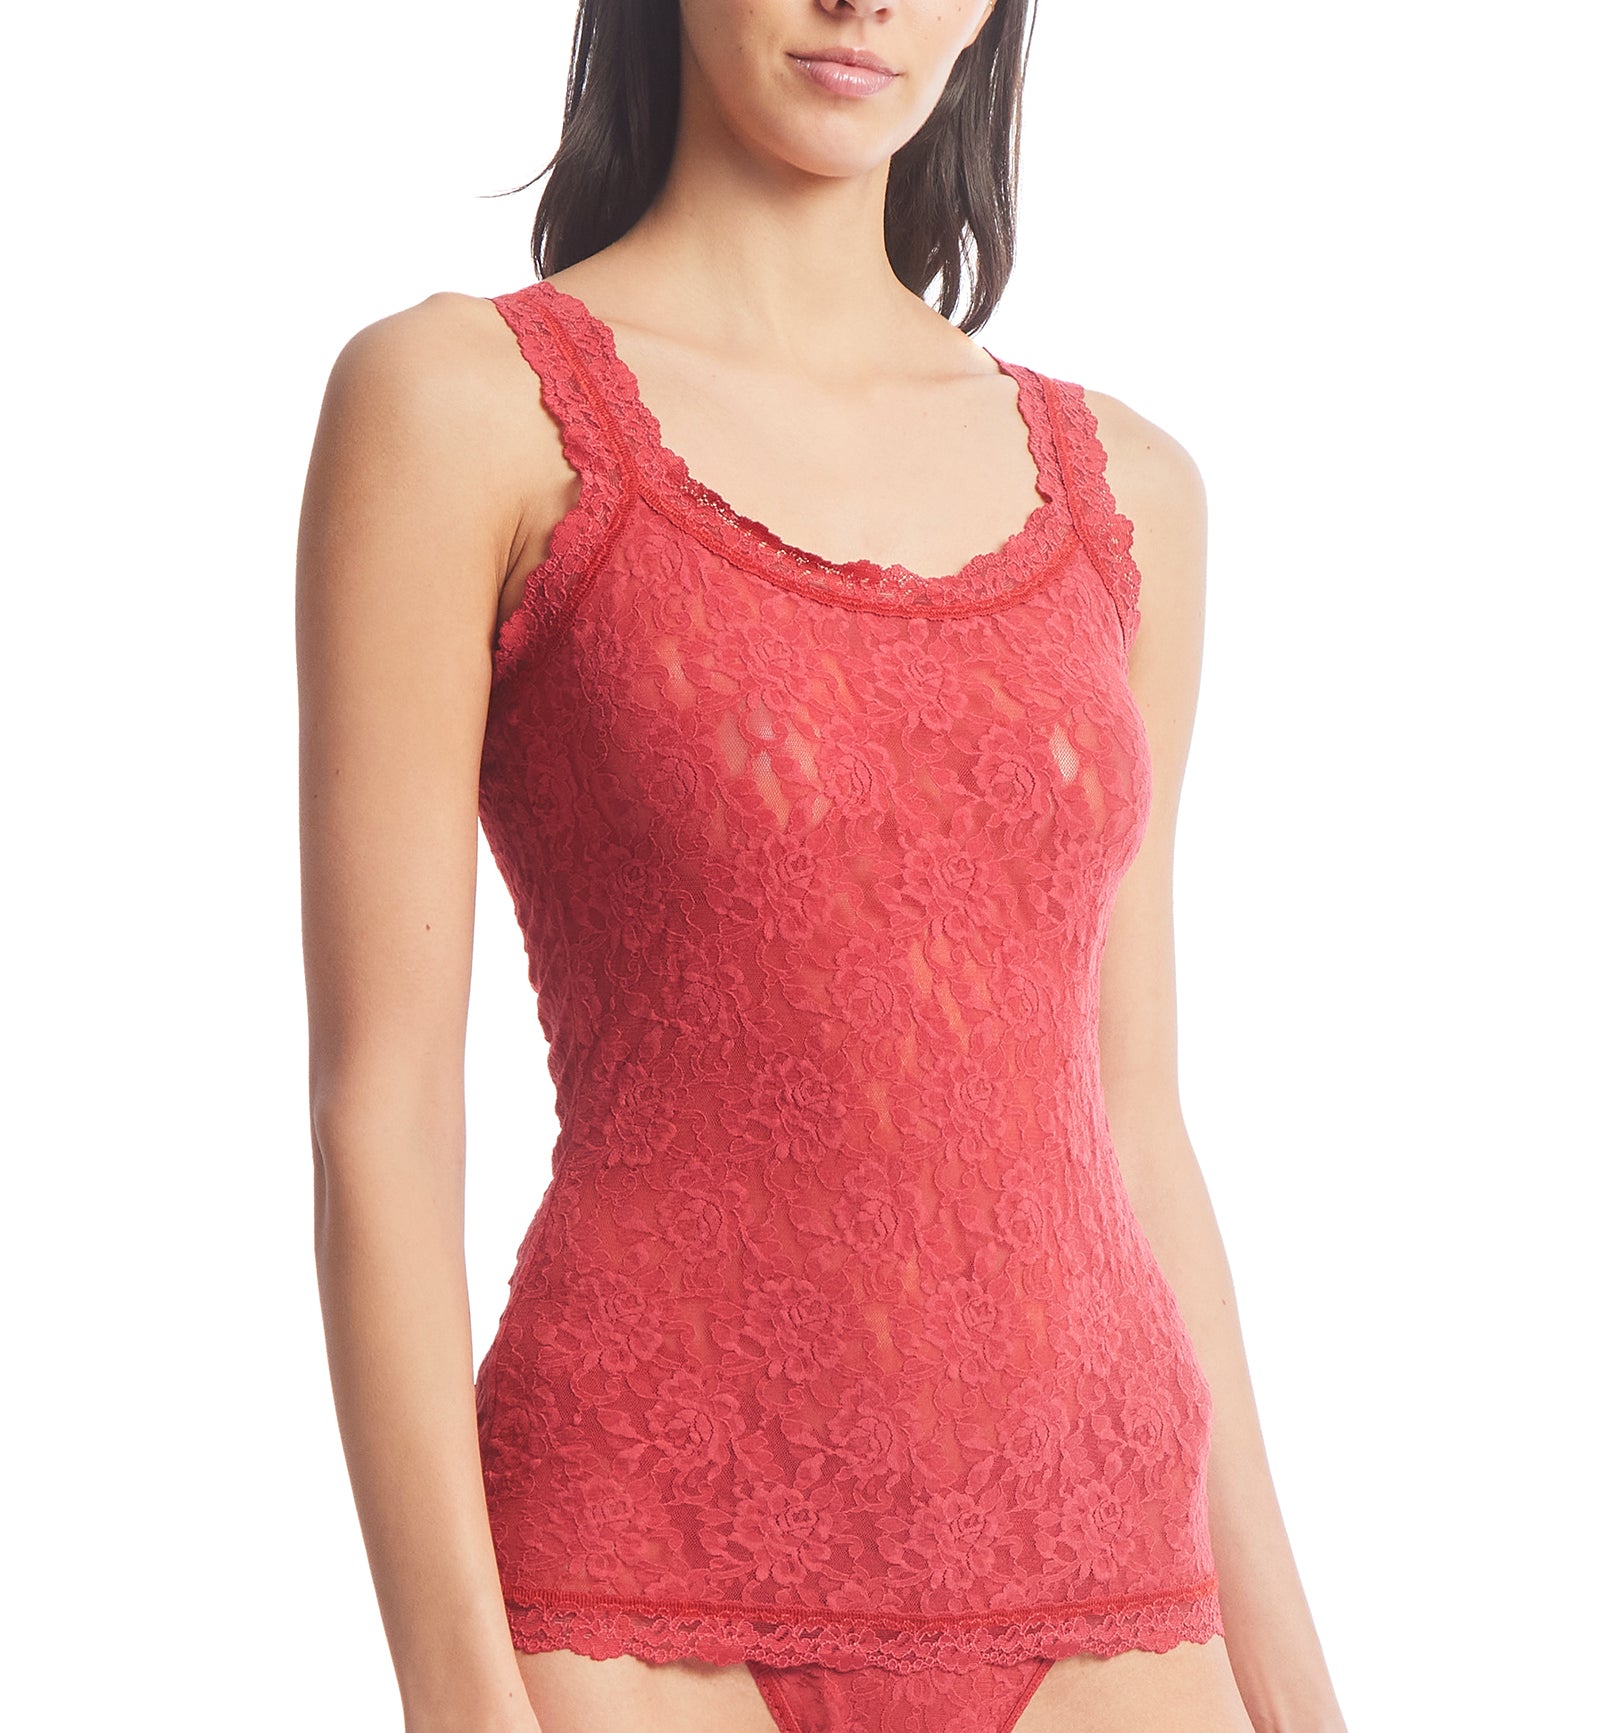 Hanky Panky Signature Lace Unlined Camisole (1390LP),XS,Burnt Sienna - Burnt Sienna,XS